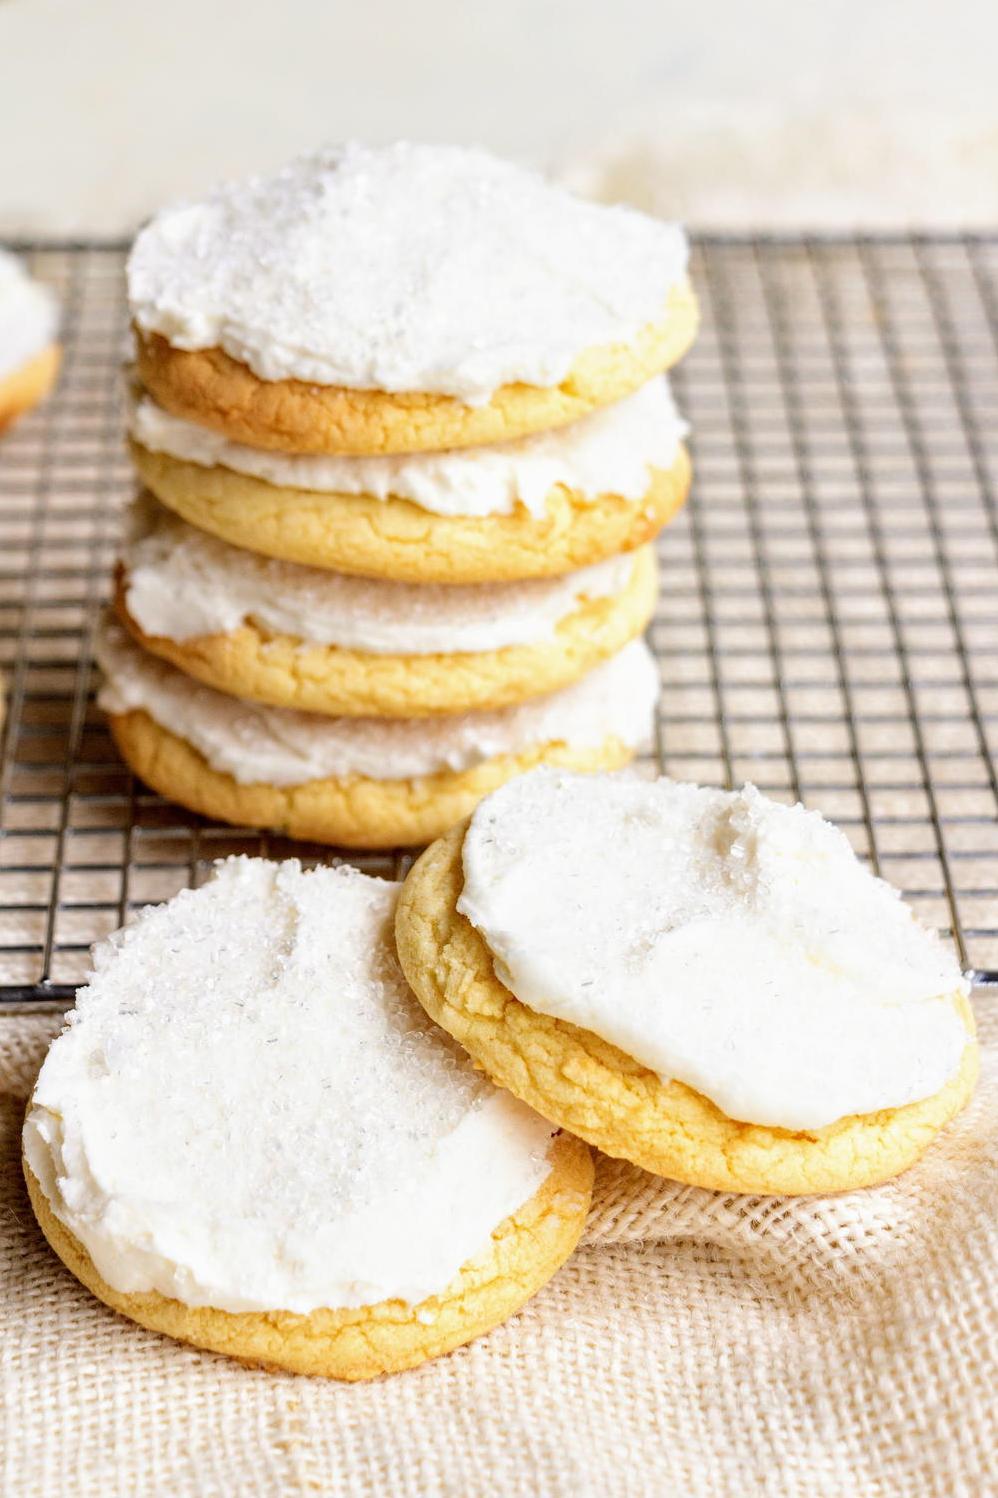  Don't let the size of these cookies fool you, they're packed with a rich and velvety flavor you'll love.